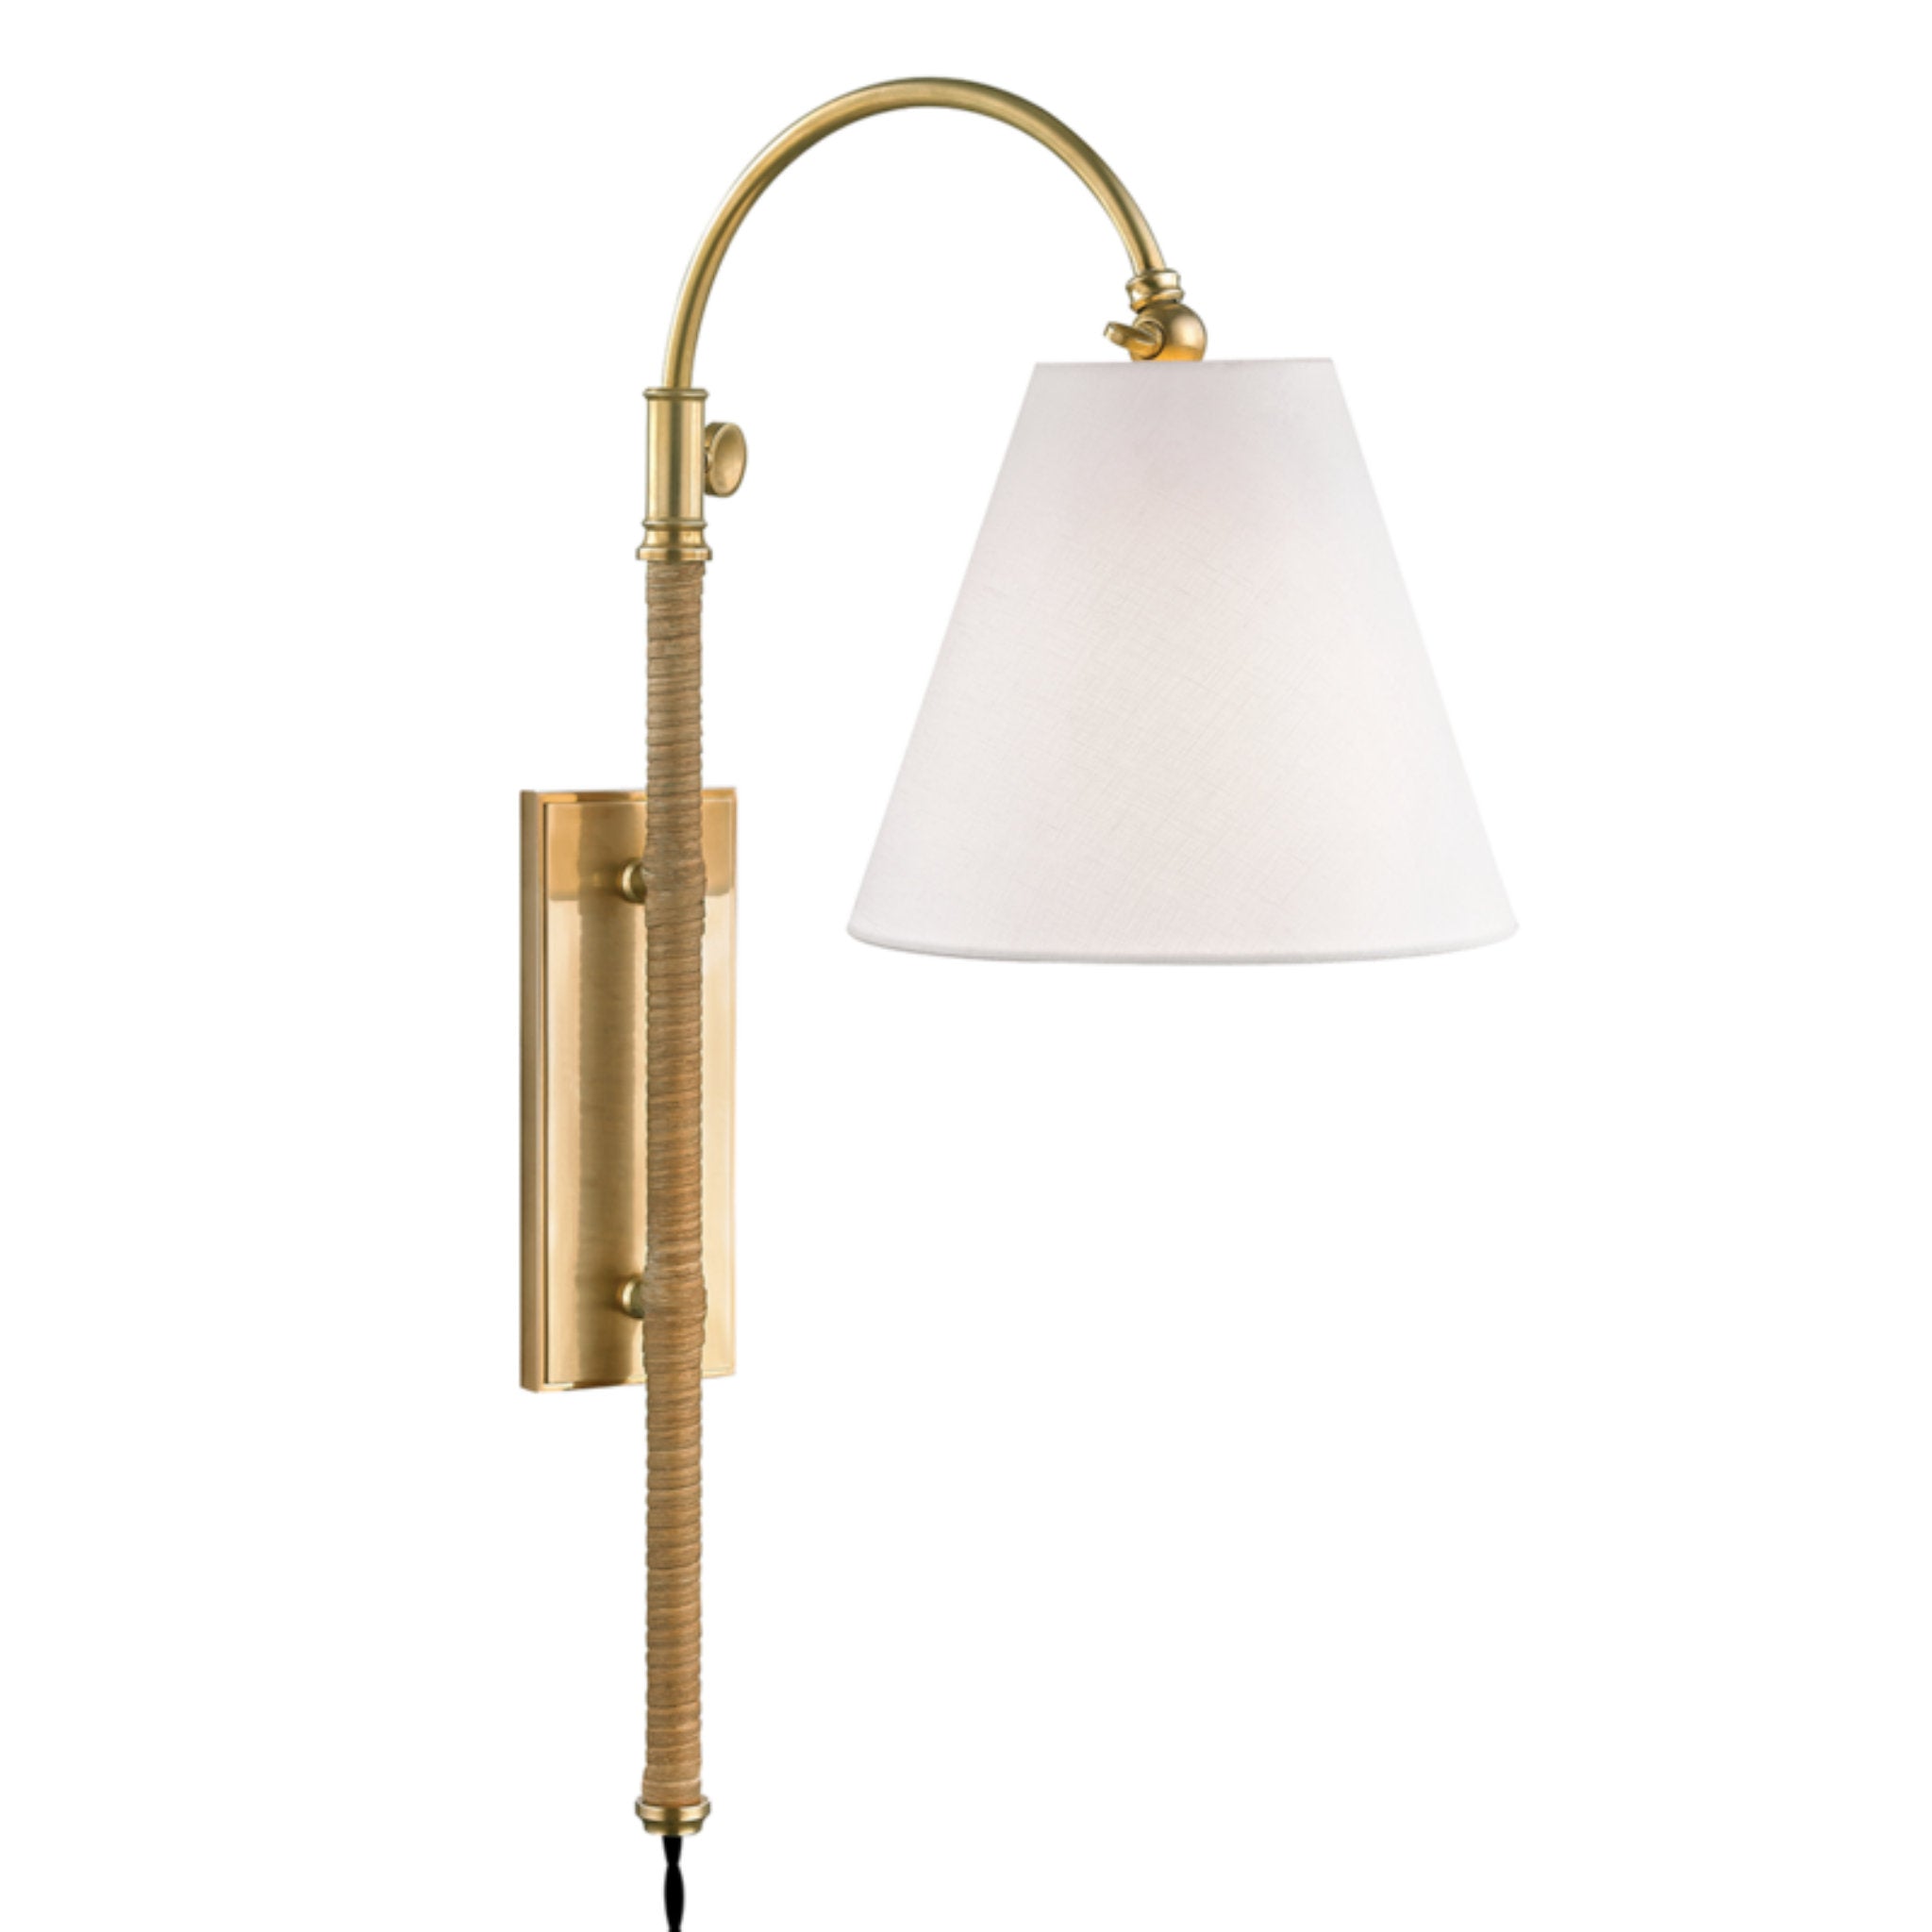 Curves No.1 1 Light Plug-in Sconce in Aged Brass by Mark D. Sikes